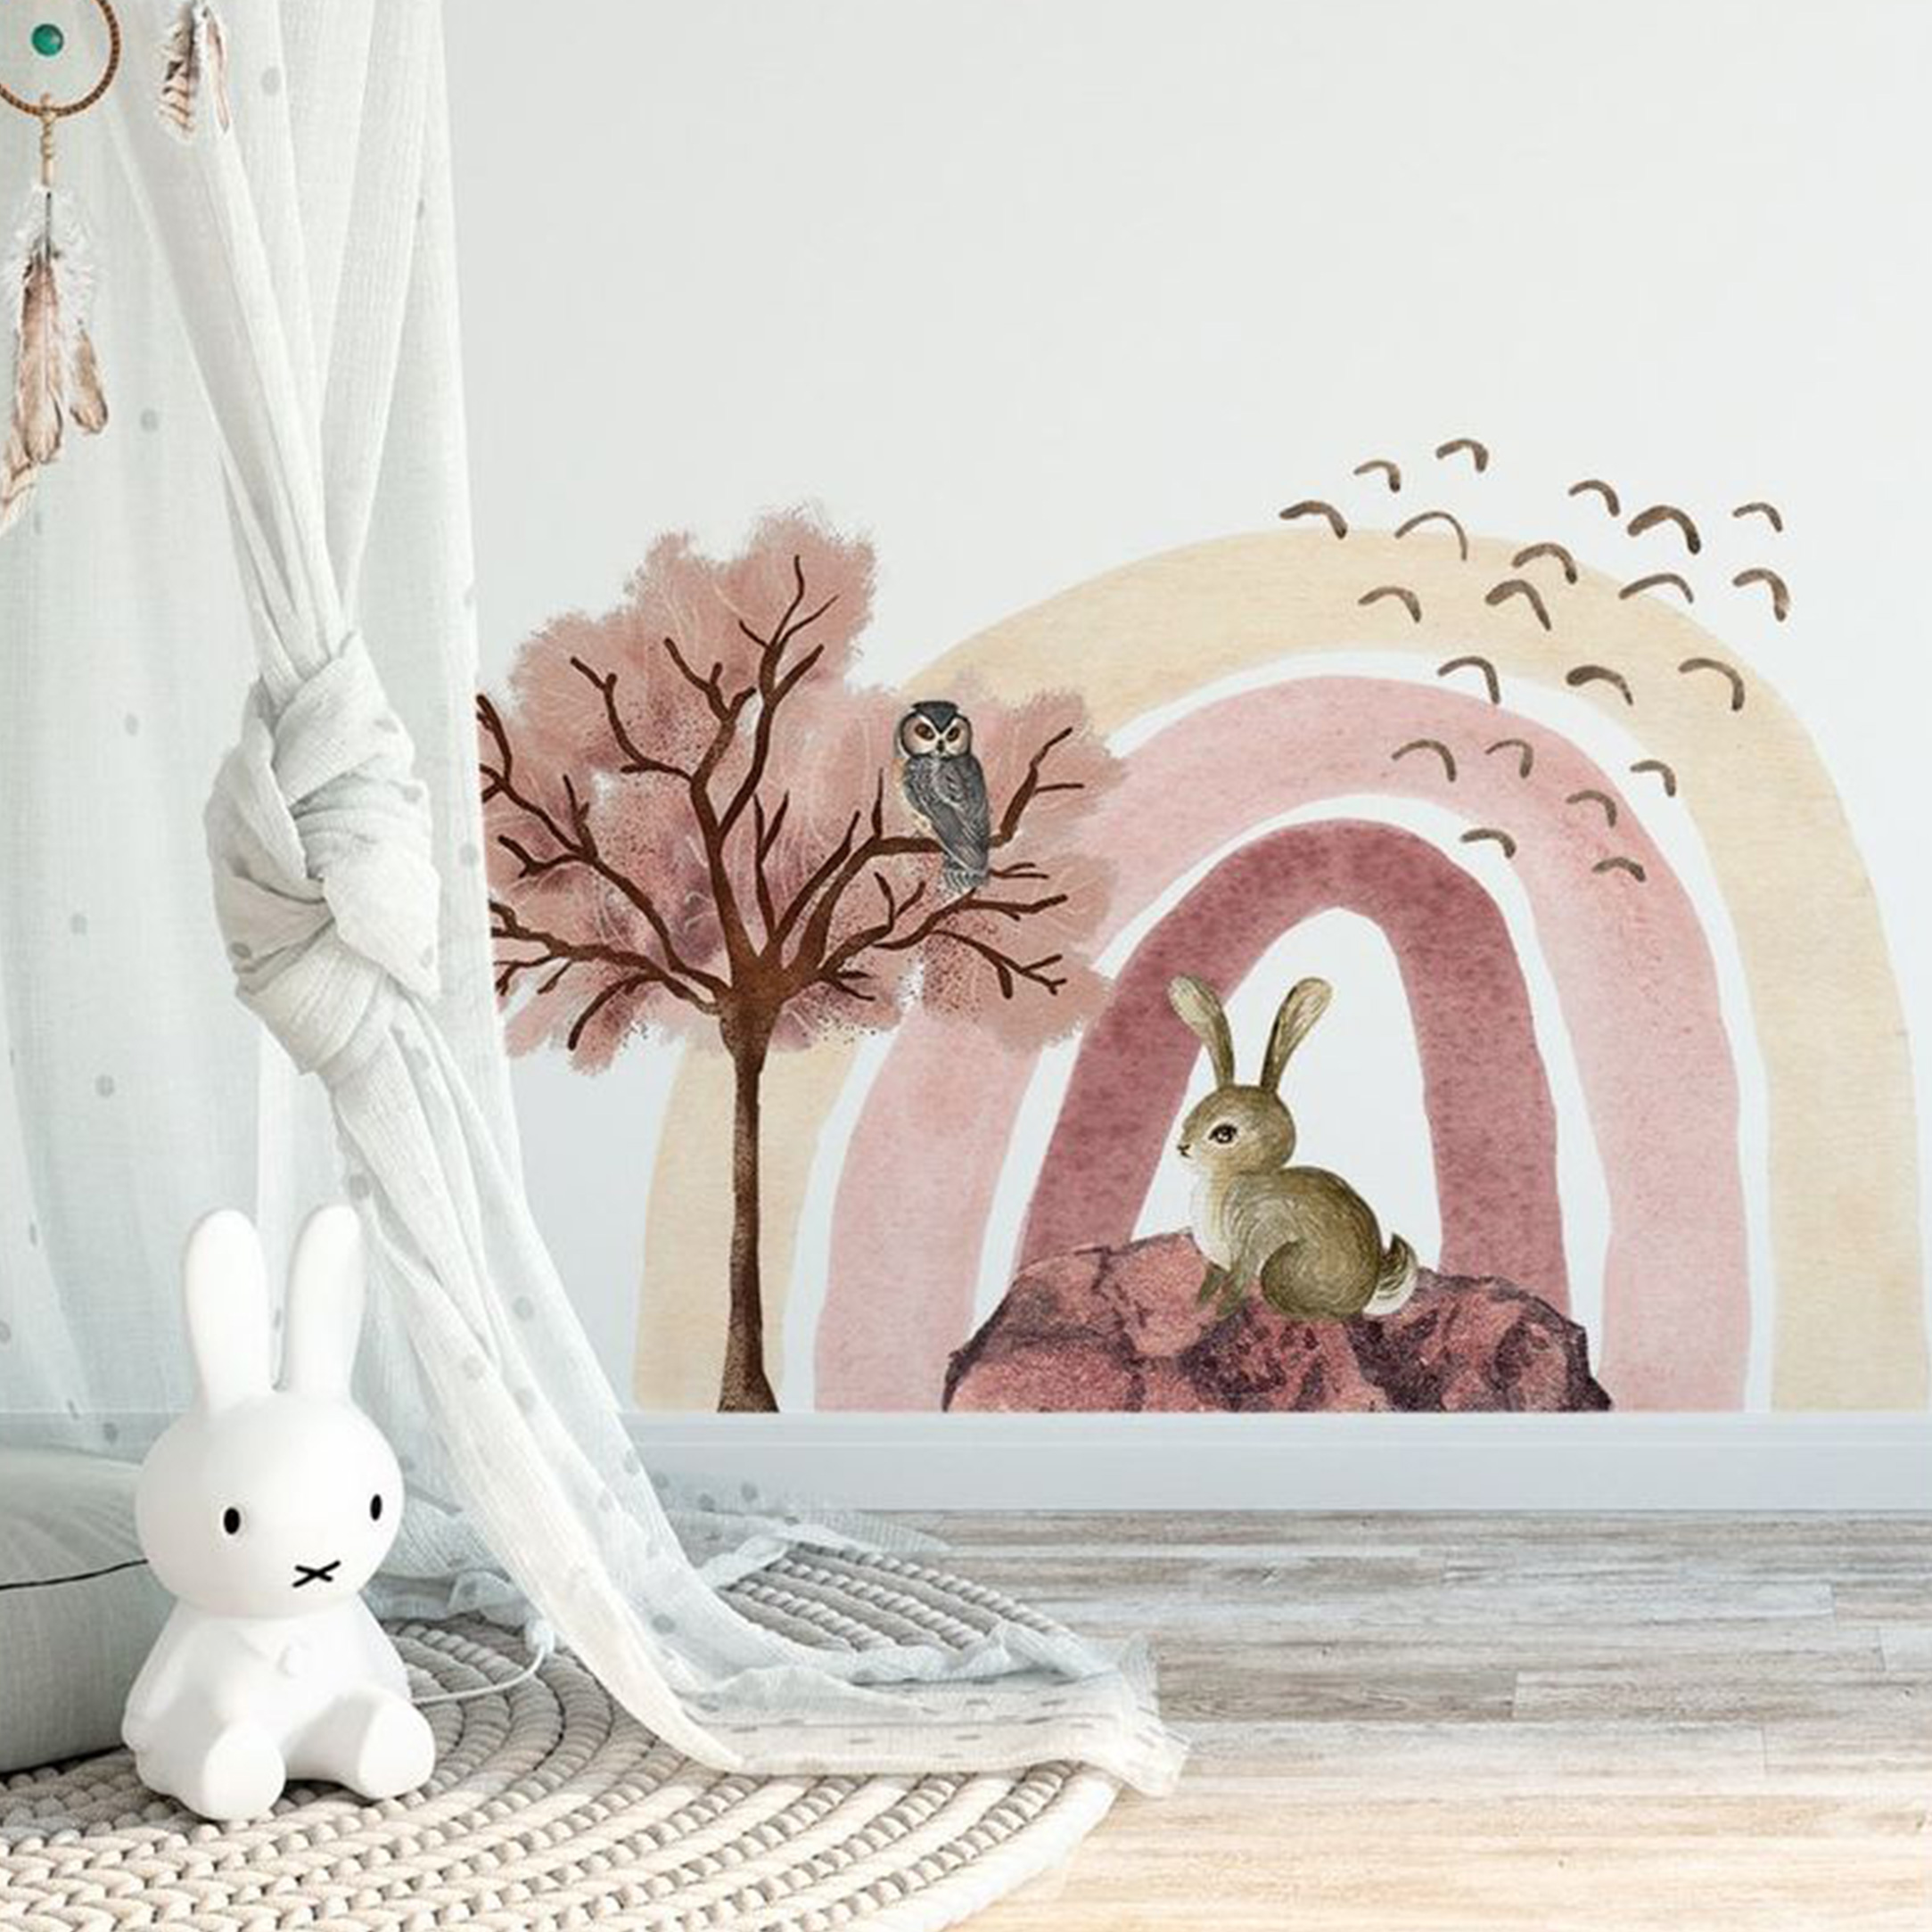 Give Your Kids Room Décor a Facelift with Wall Stickers